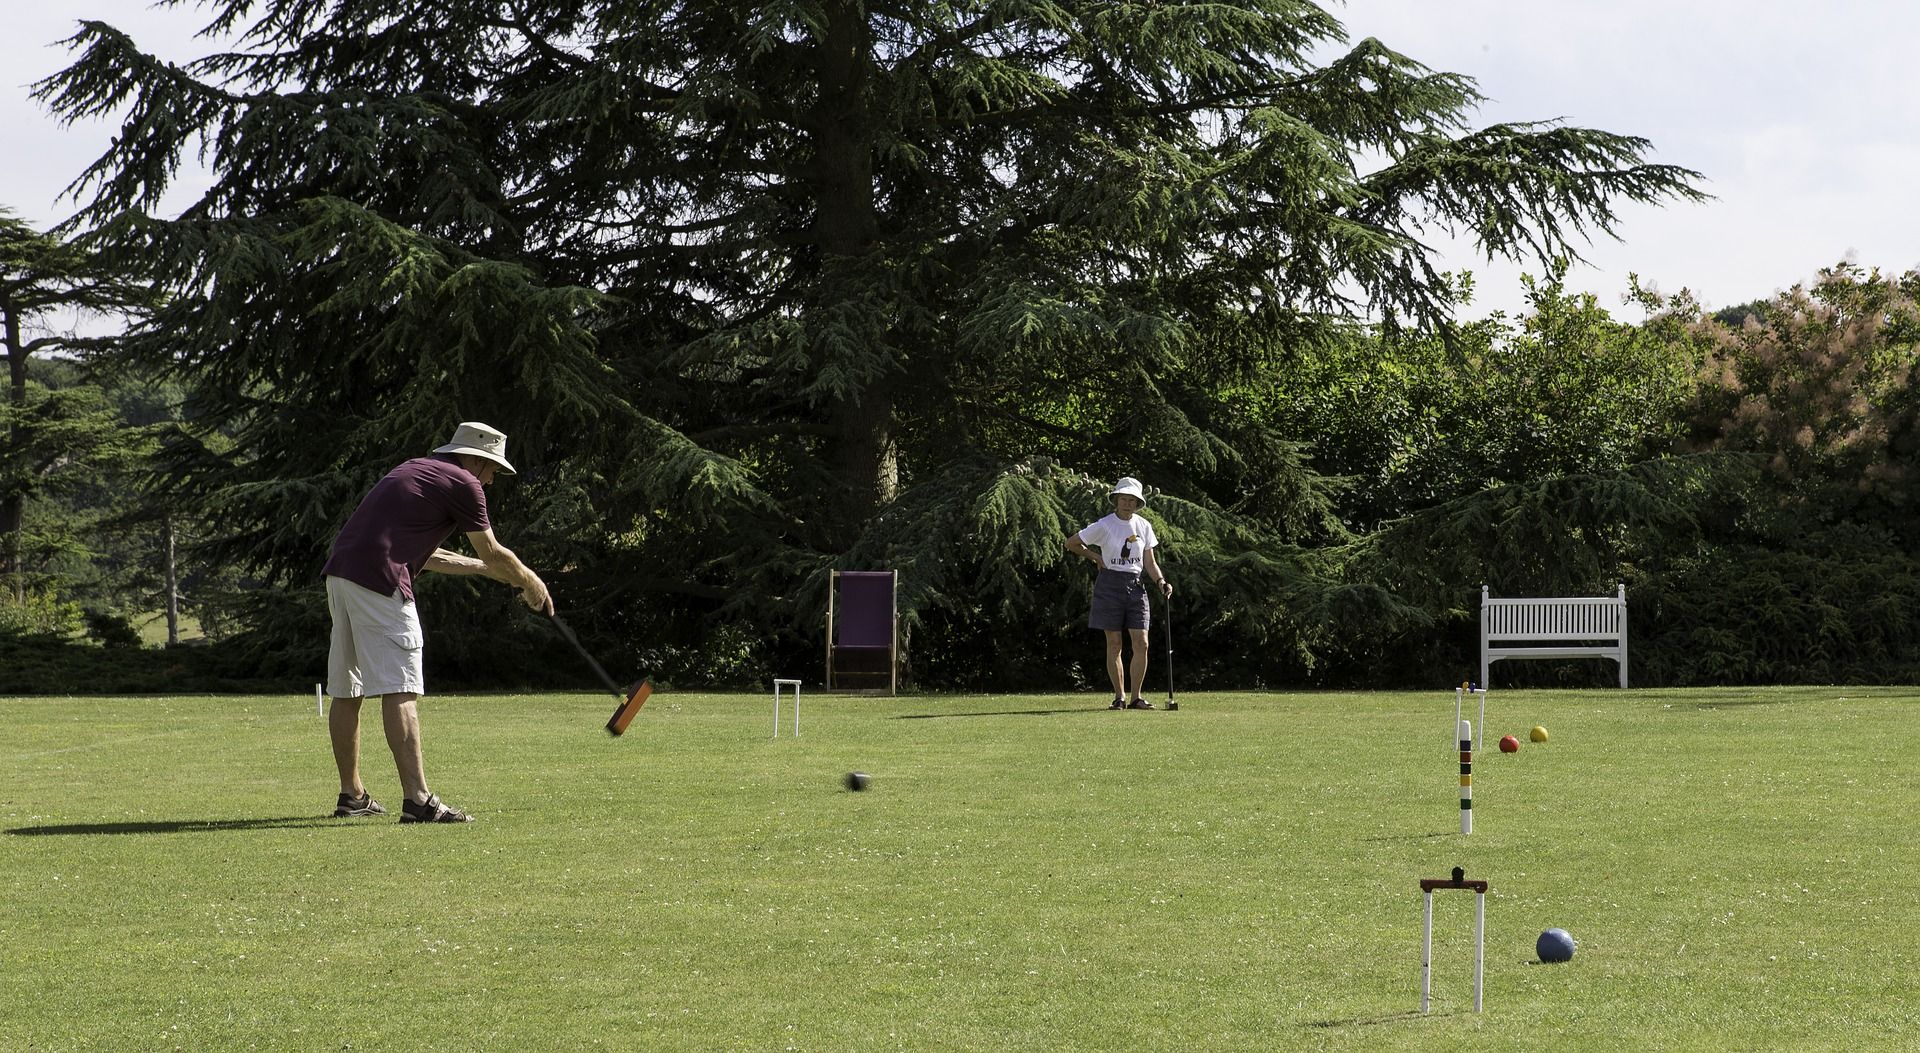 Two people playing Croquet during a sunny day